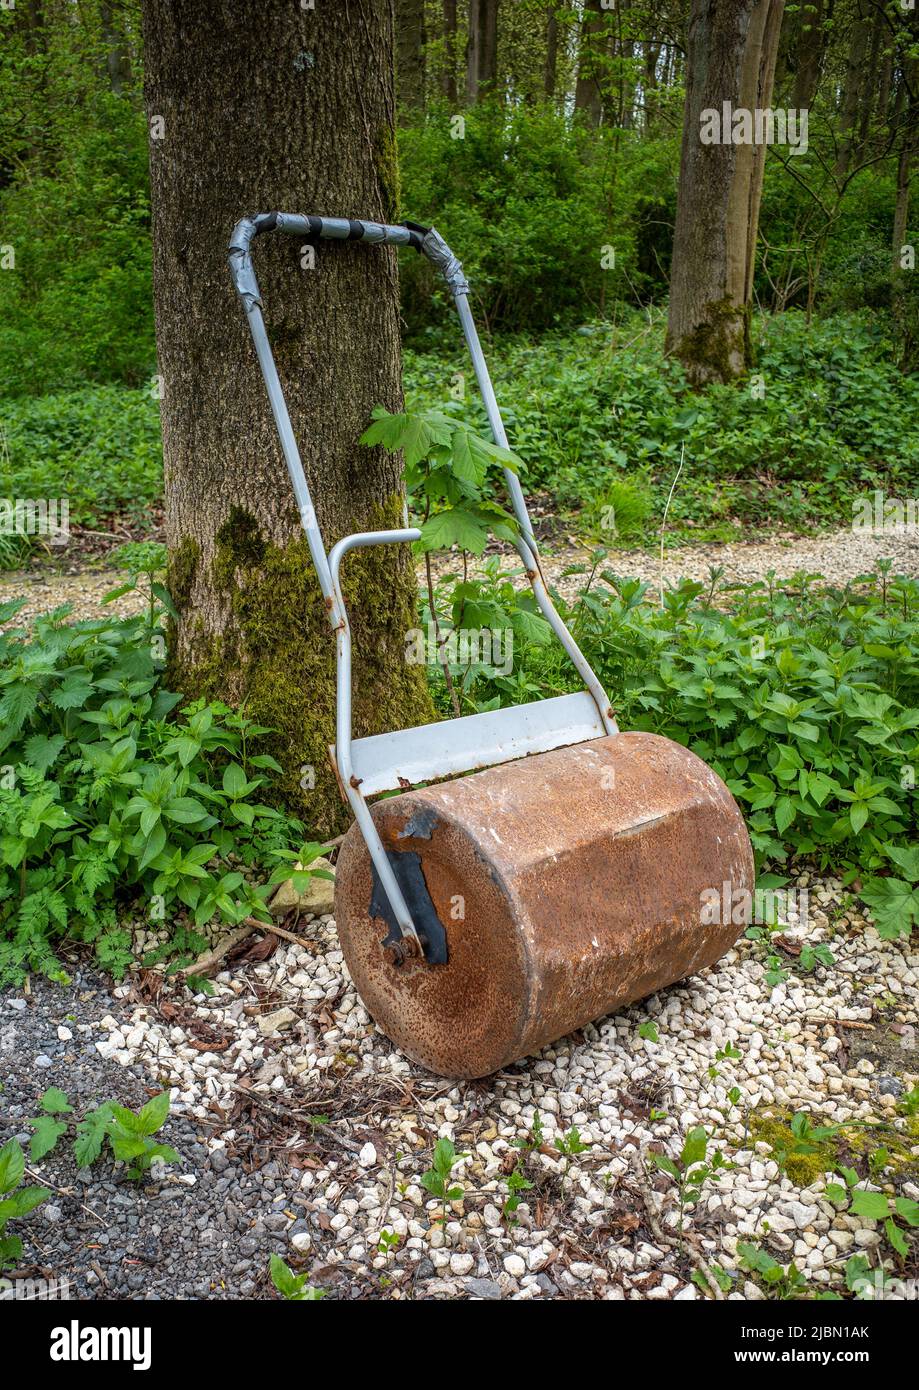 Old rusty garden roller leaning up against a tree in a wooded area. Stock Photo